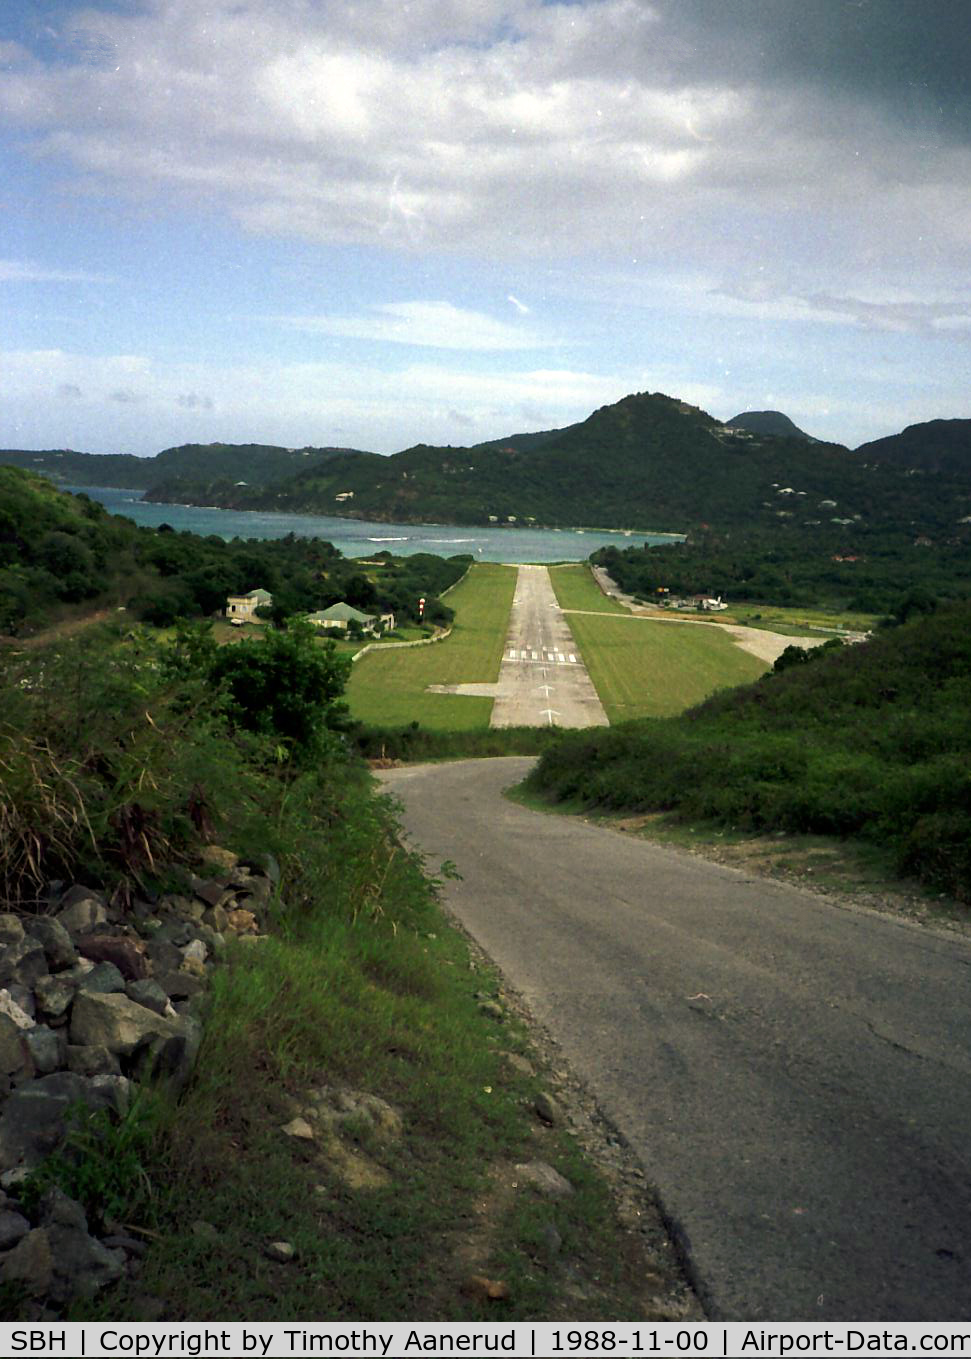 Gustaf III Airport, St. Jean, Saint Barthélemy Guadeloupe (SBH) - St Barthelemy, Approach end of Rwy 10.  All traffic lands this direction